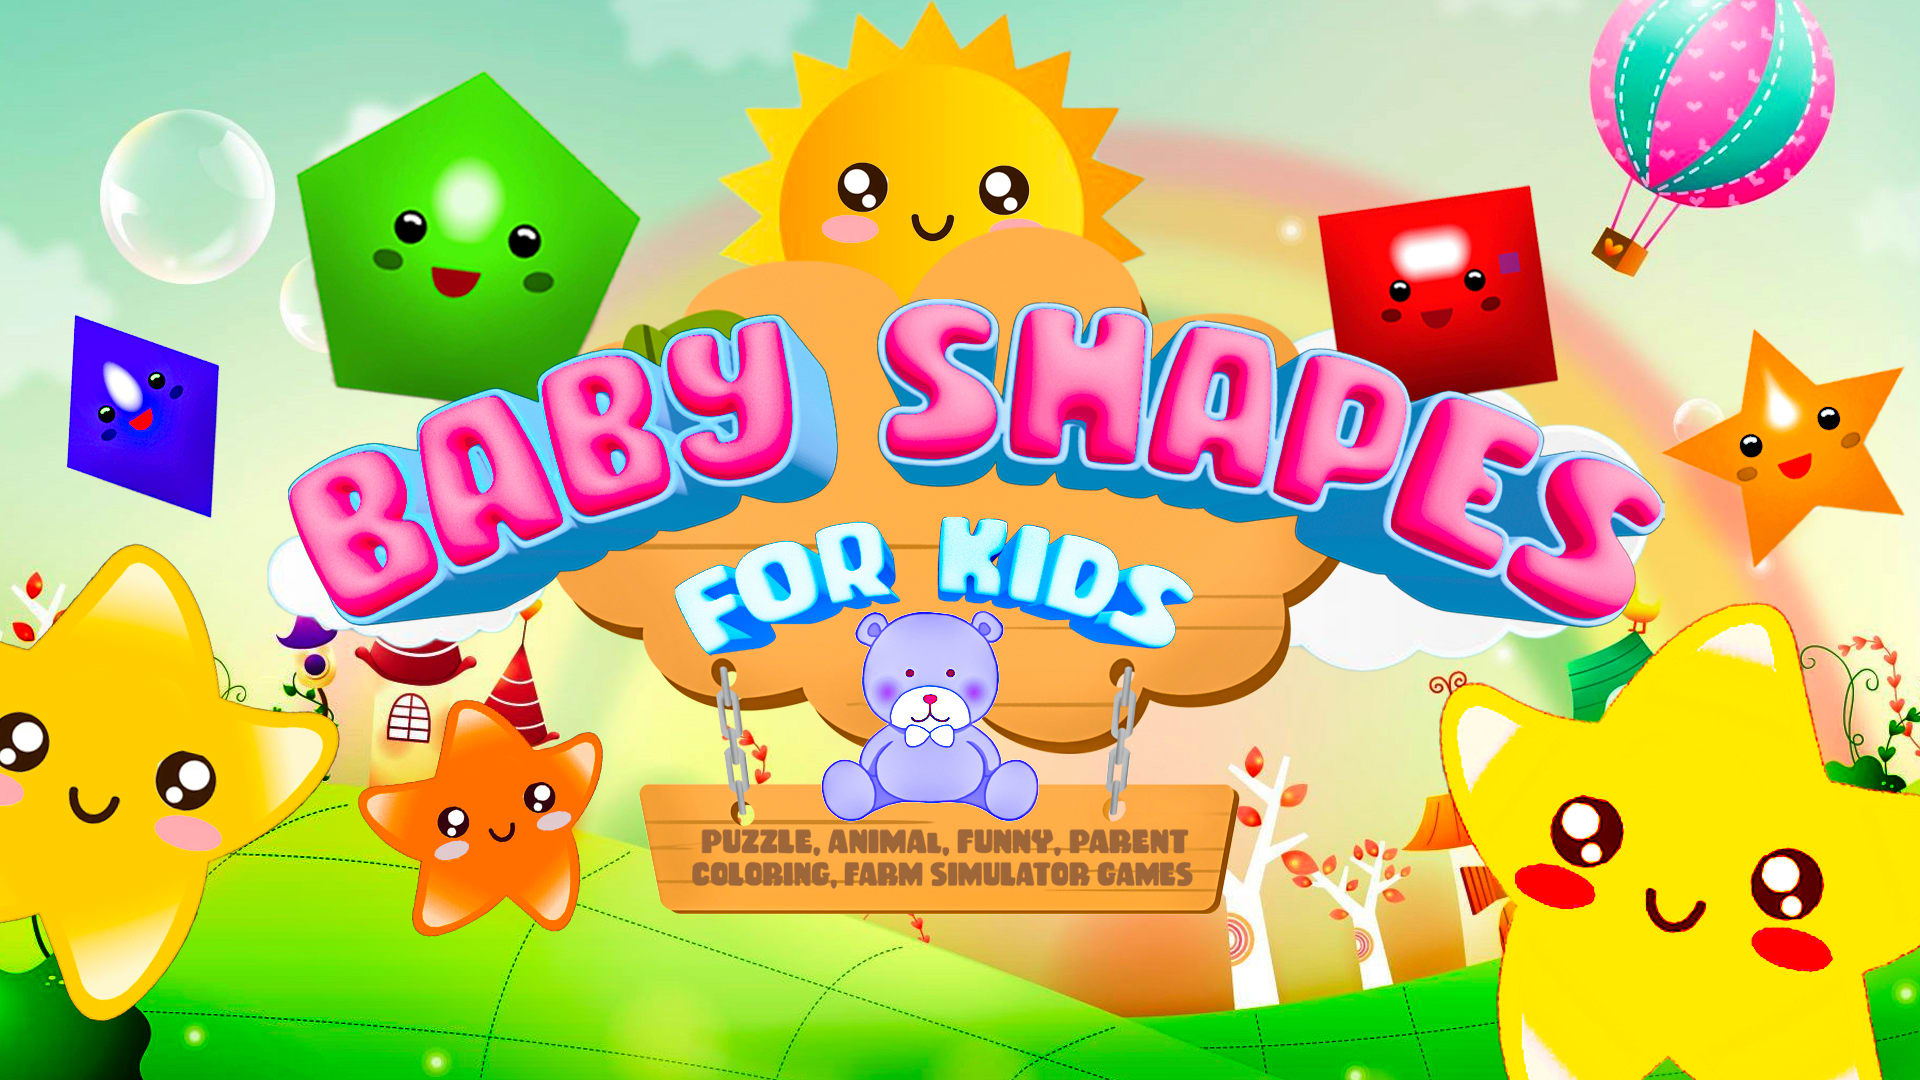 Baby Shapes for Kids - Puzzle,Animal,Funny, Parent,Coloring,Farm Simulator Games 1